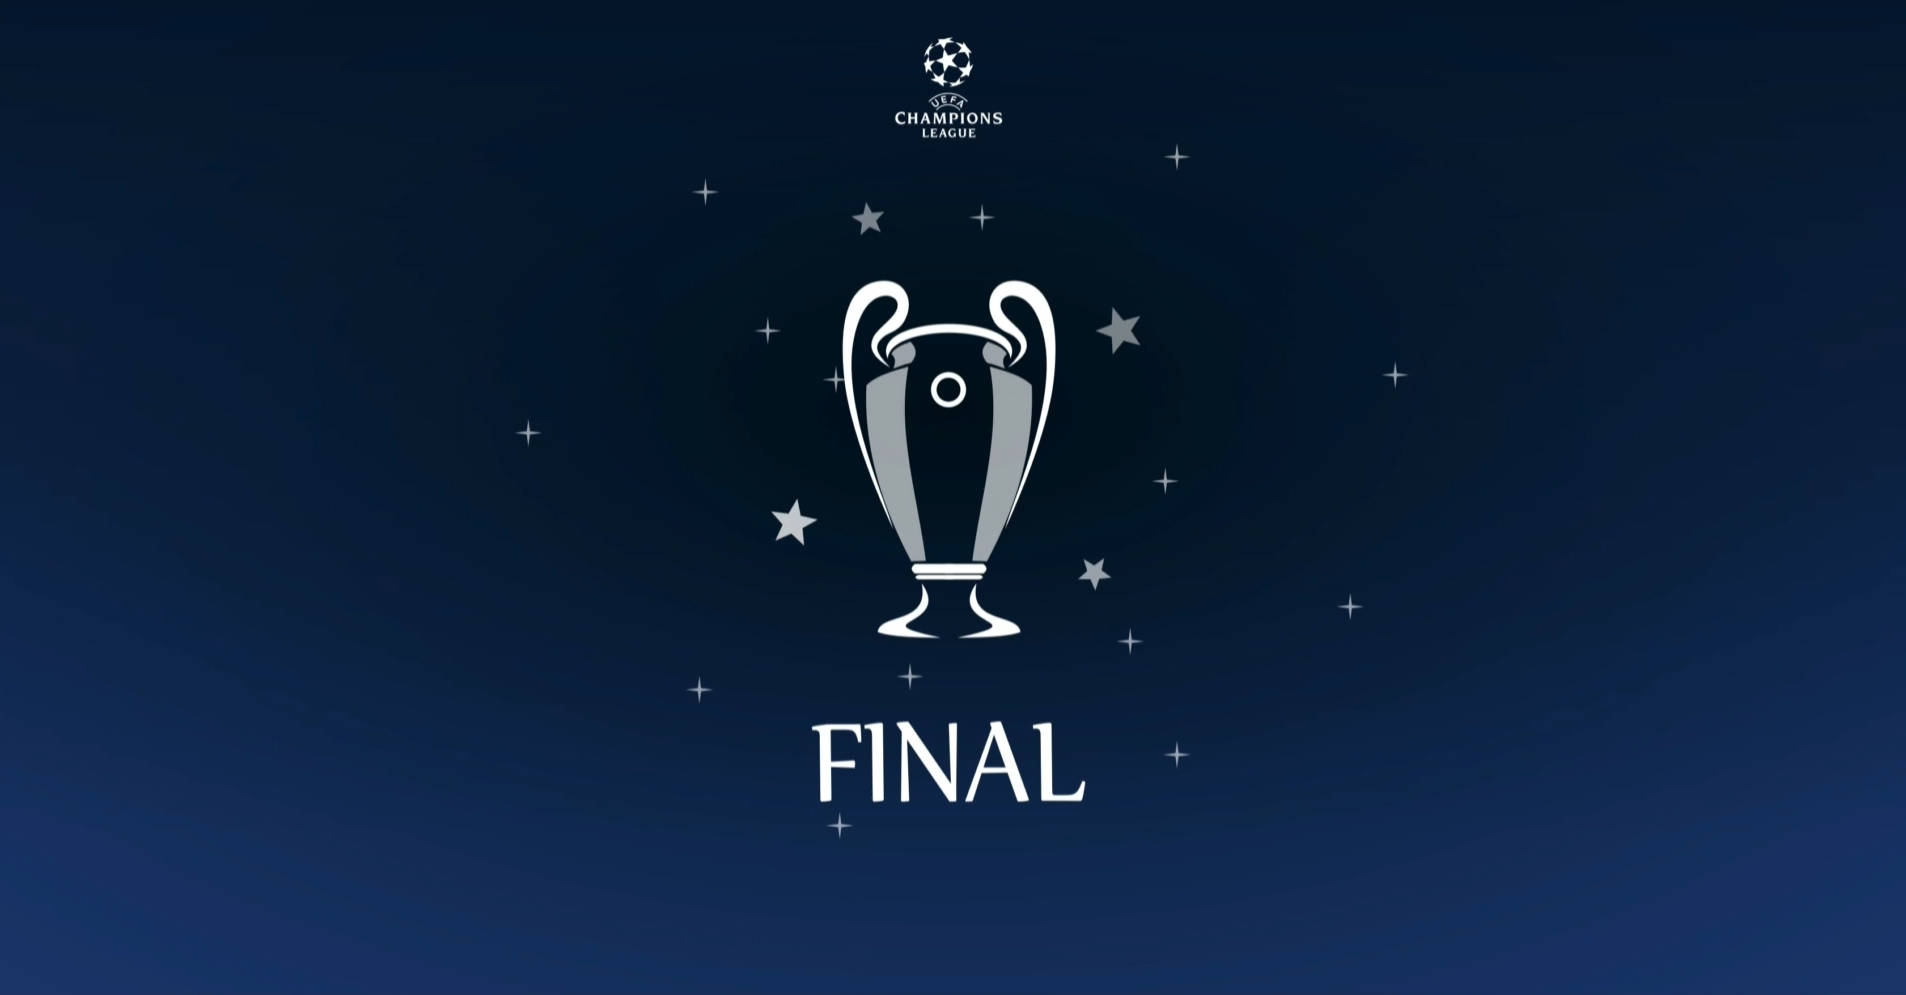 100+] Uefa Champions League Wallpapers